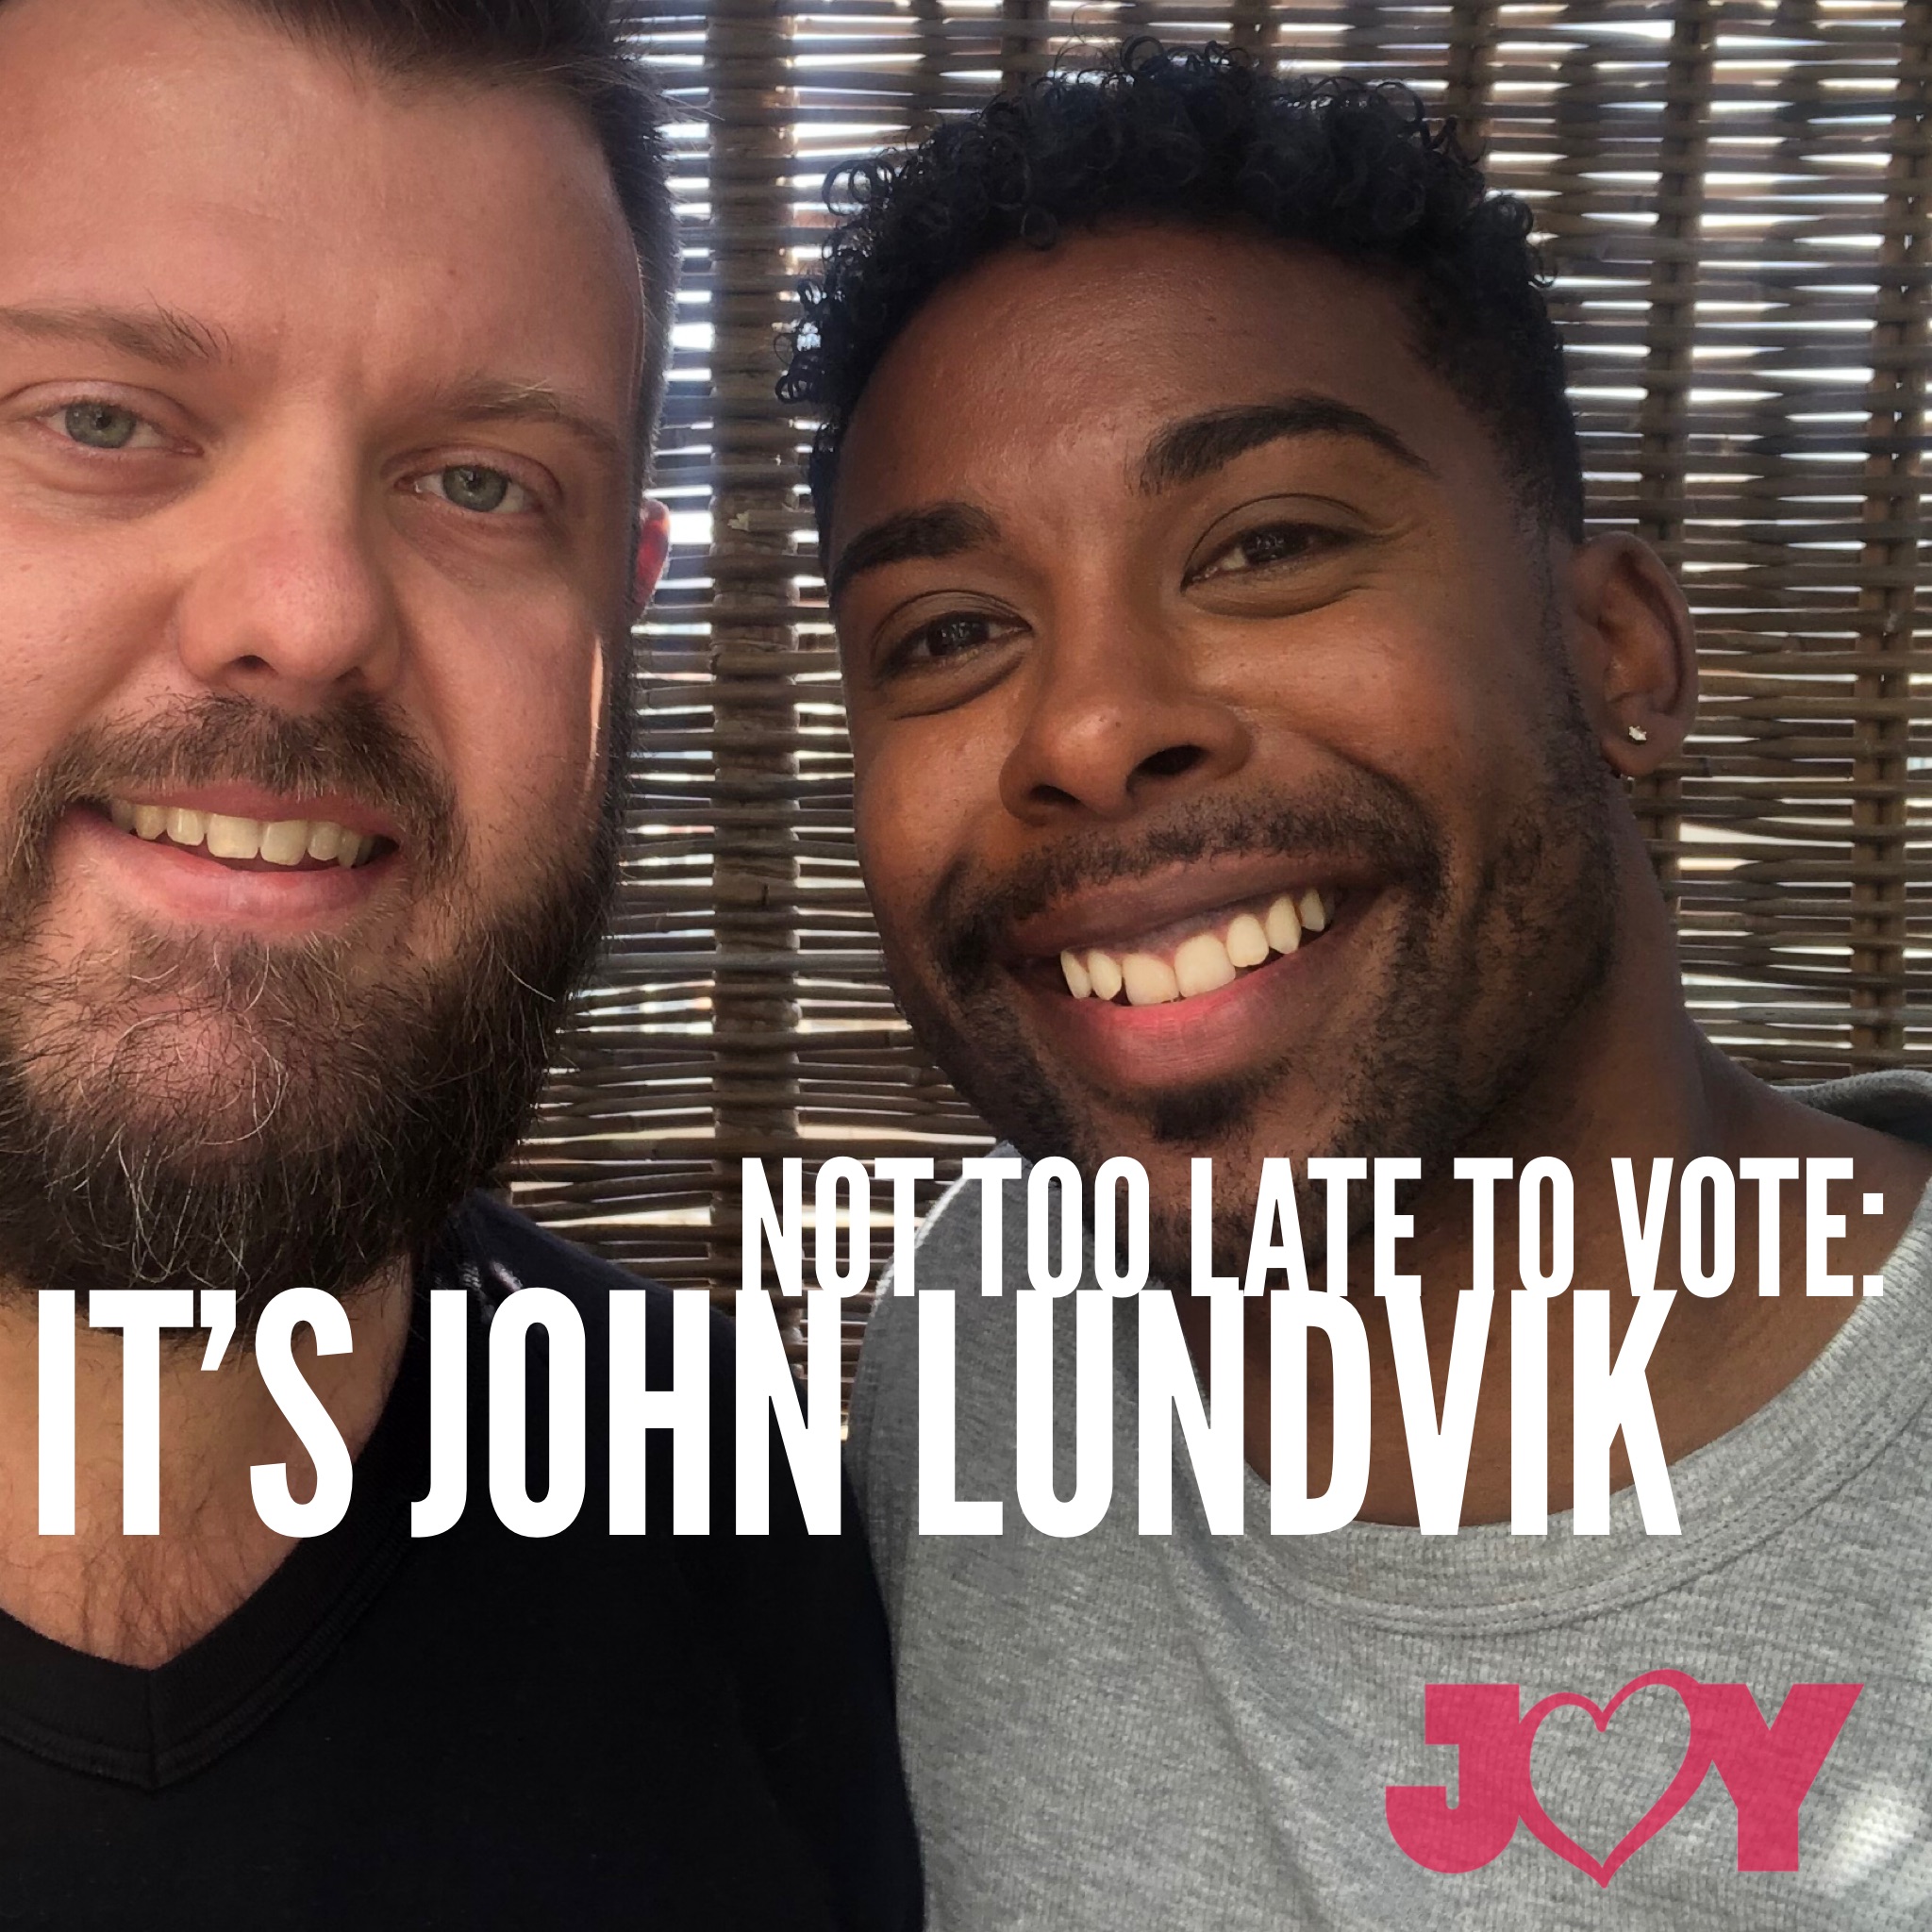 Not too late to vote: It’s John Lundvik